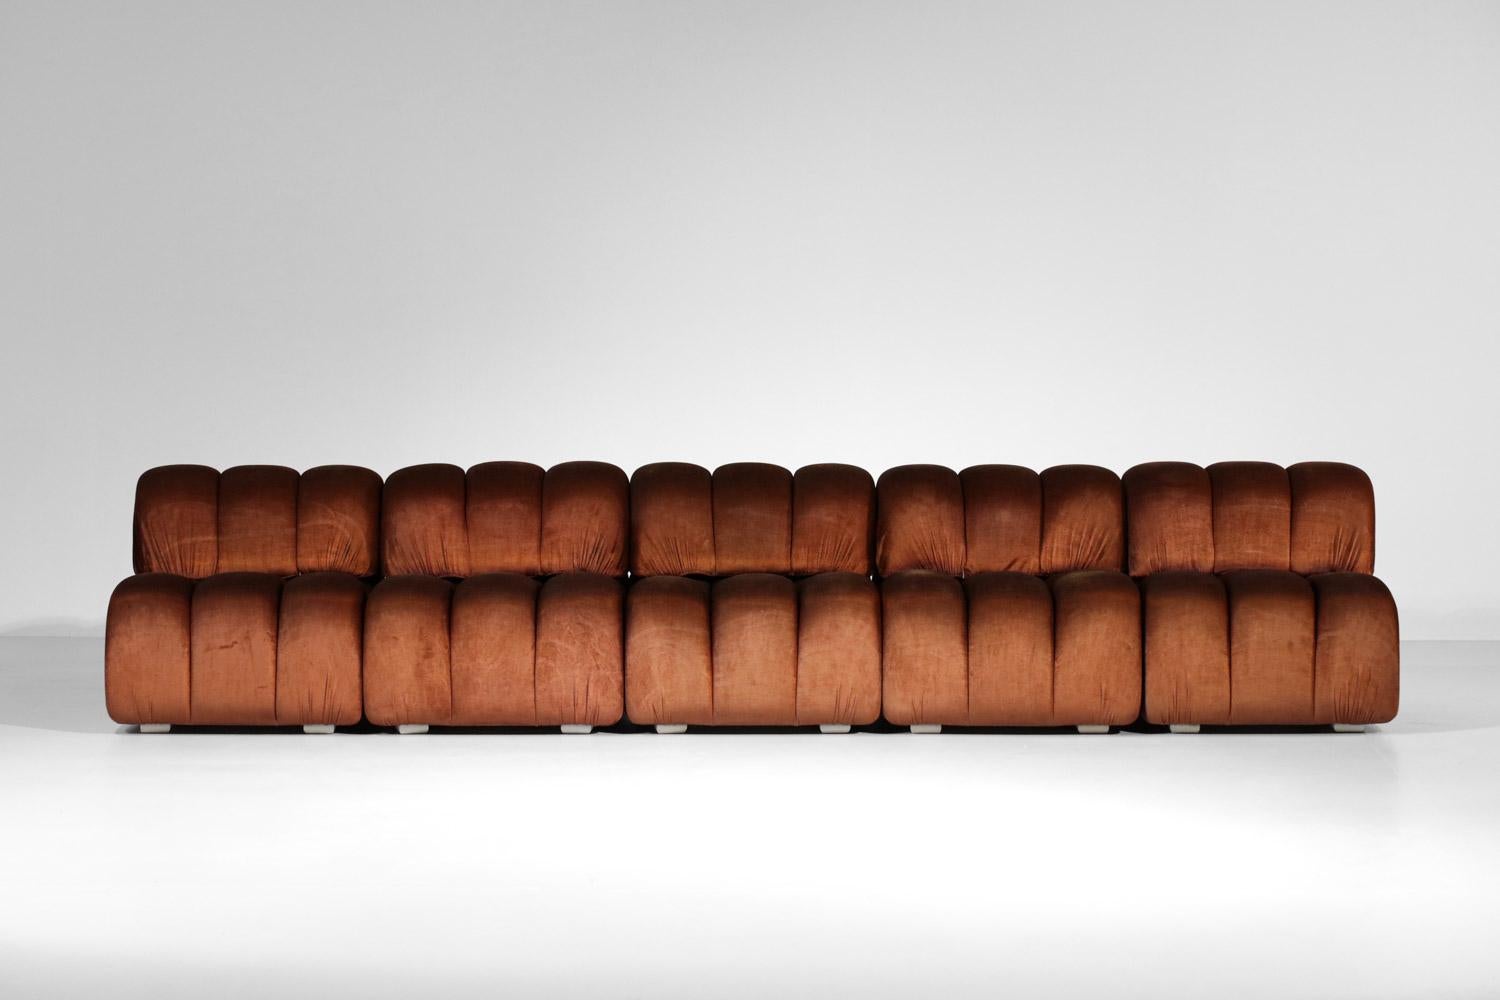 Very large modular sofa from the 70s in the taste of Mario Bellini's work. This sofa is composed of 5 independent heaters / modules covered with brown velvet (original fabric). Possibility to change the layout of the sofa to create several different